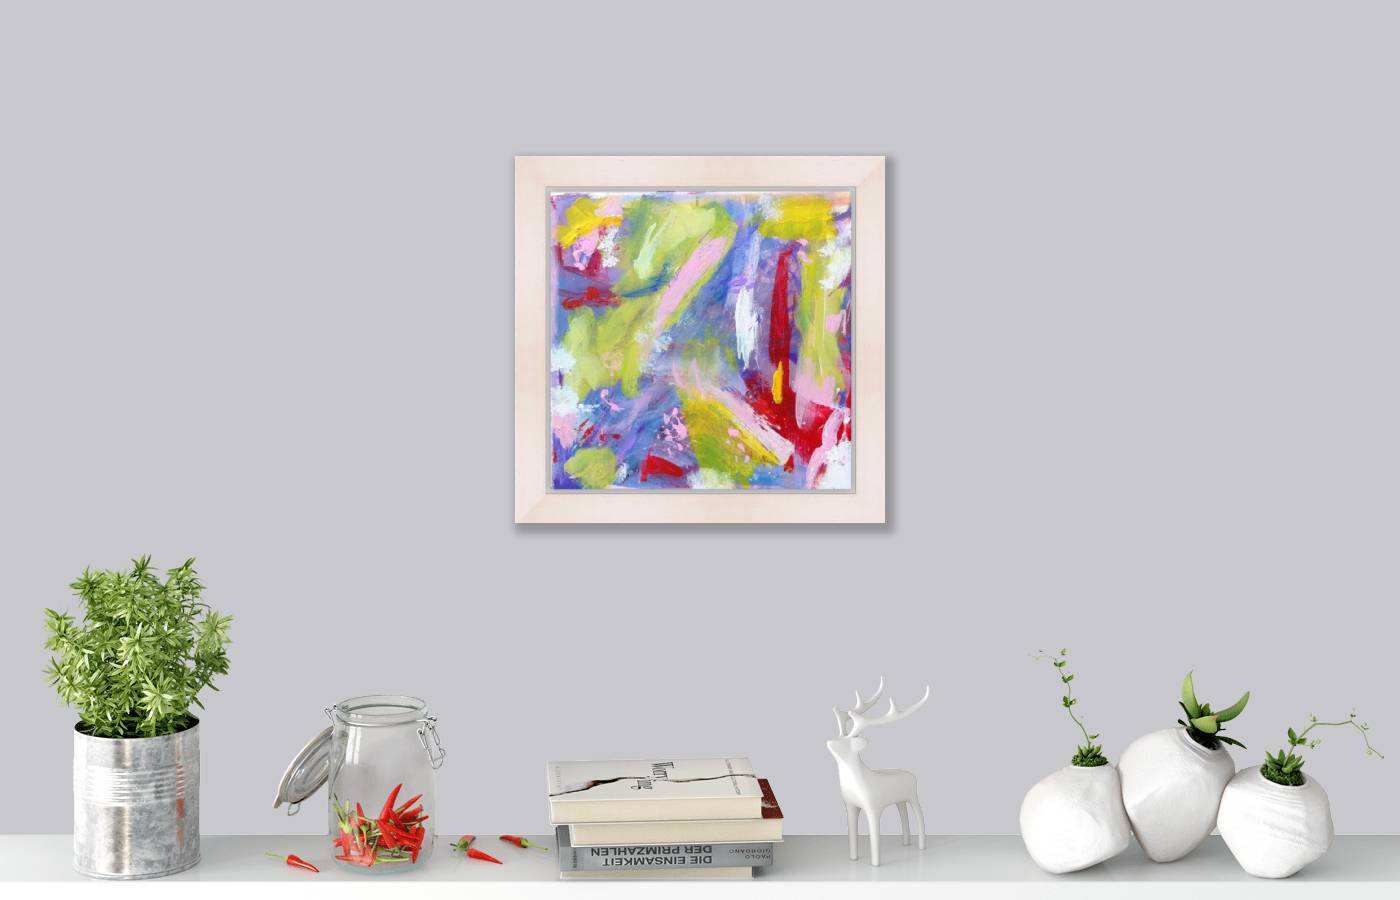 Candyfloss - Original Abstract Expressive Painting